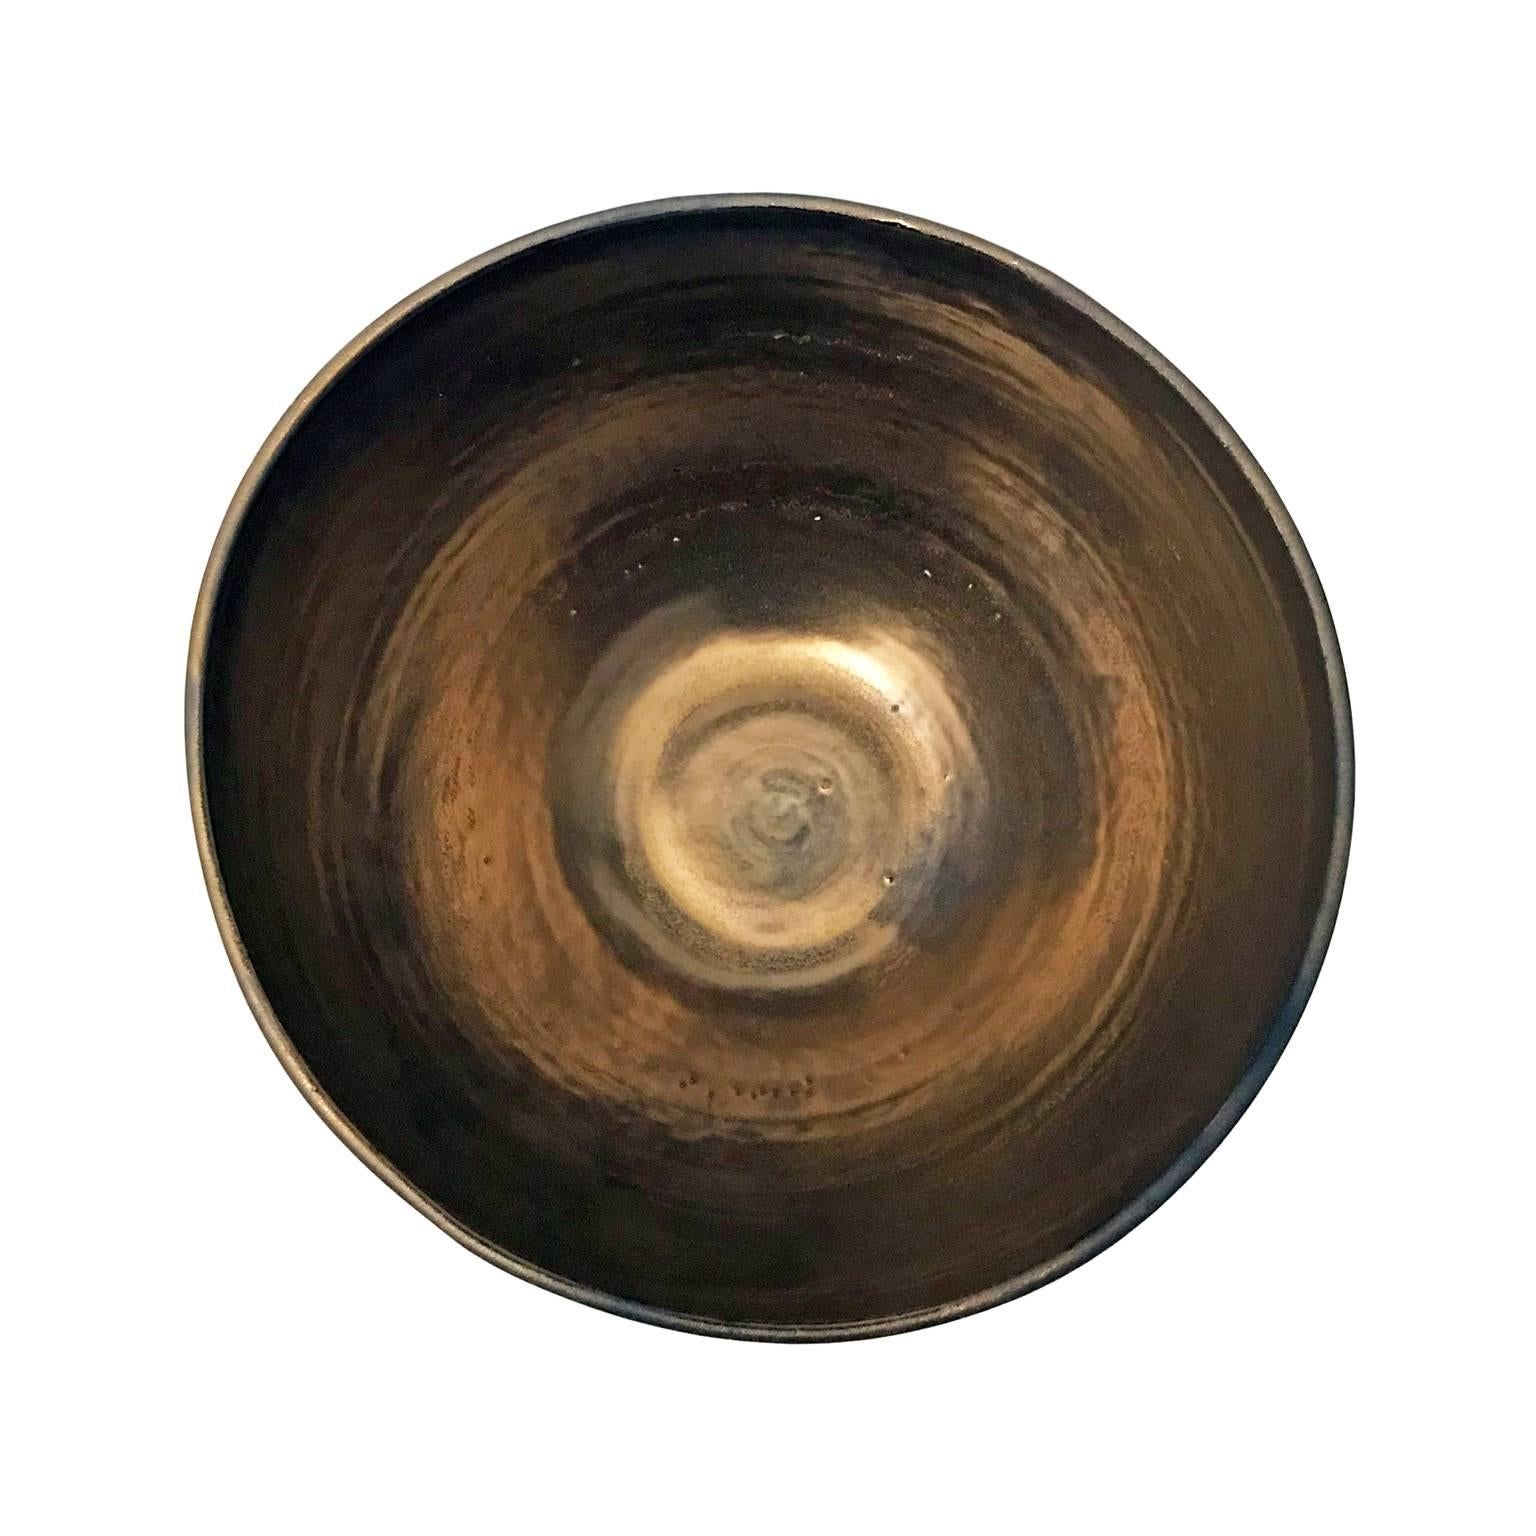 Curved black ceramic bowl with gold glaze interior by Sandi Fellman, USA, 2018.

Veteran photographer Sandi Fellman's ceramic vessels are an exploration of a new medium. The forms, palettes, and sensuality of her photos can be found within each